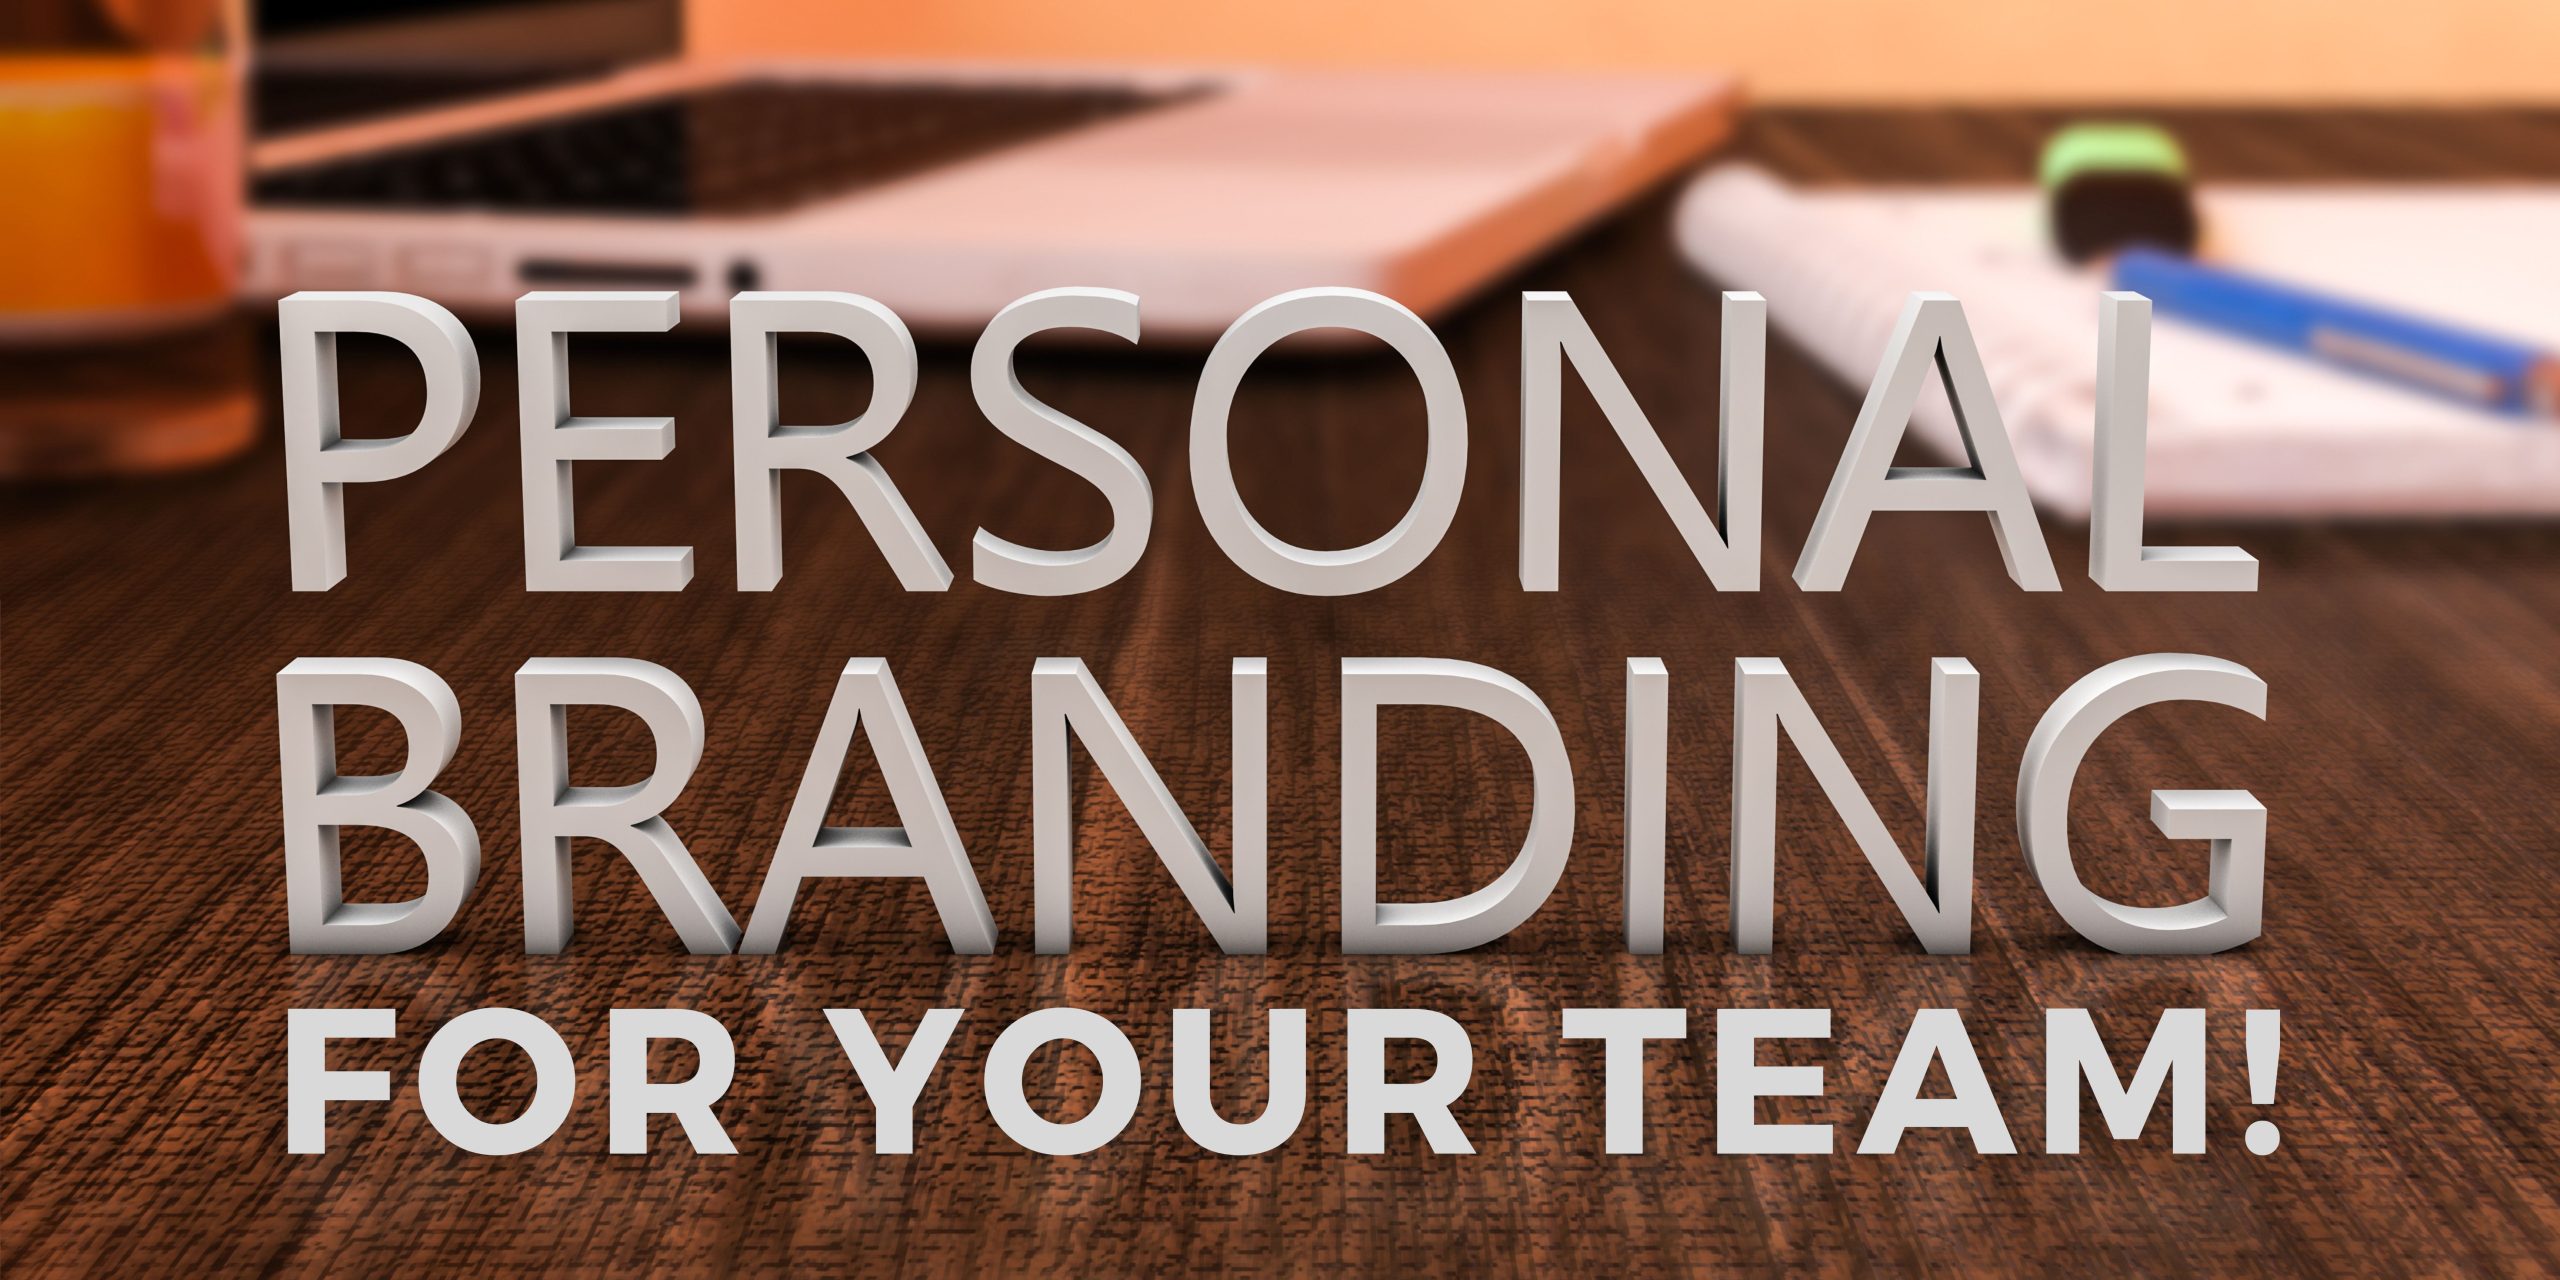 Workshop on Unleash the Power of Personal Branding on LinkedIn for Your Team!